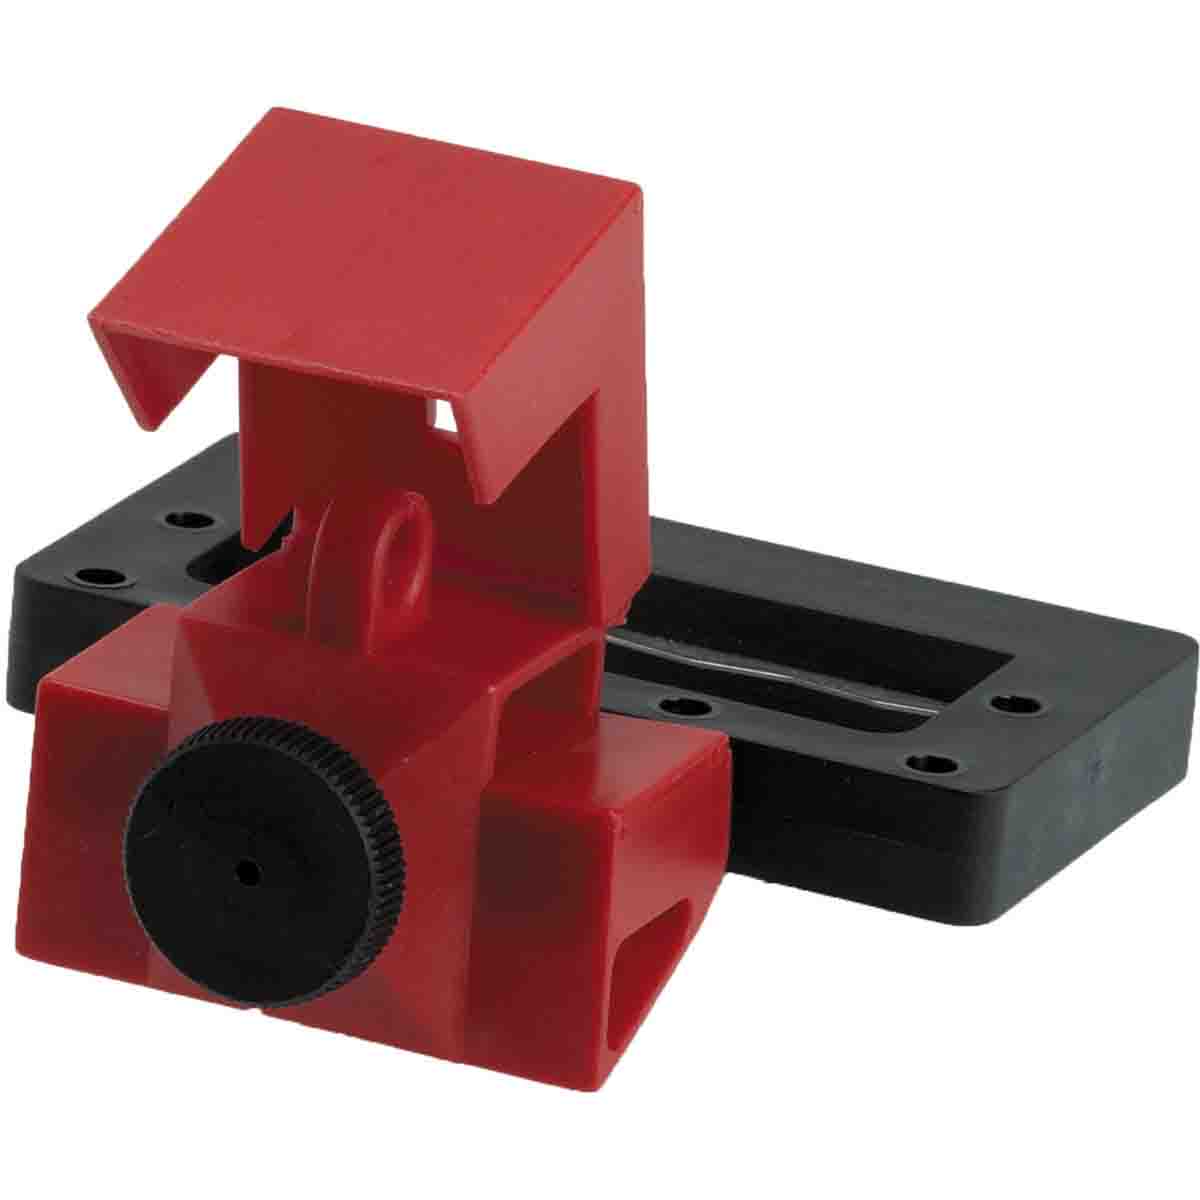 Brady Taglock Circuit Breaker Lockout Device No Lock Needed Red 148701 480/600 Volt Clamp-On Single-Pole Breaker Lockout Device with Detachable Cleat